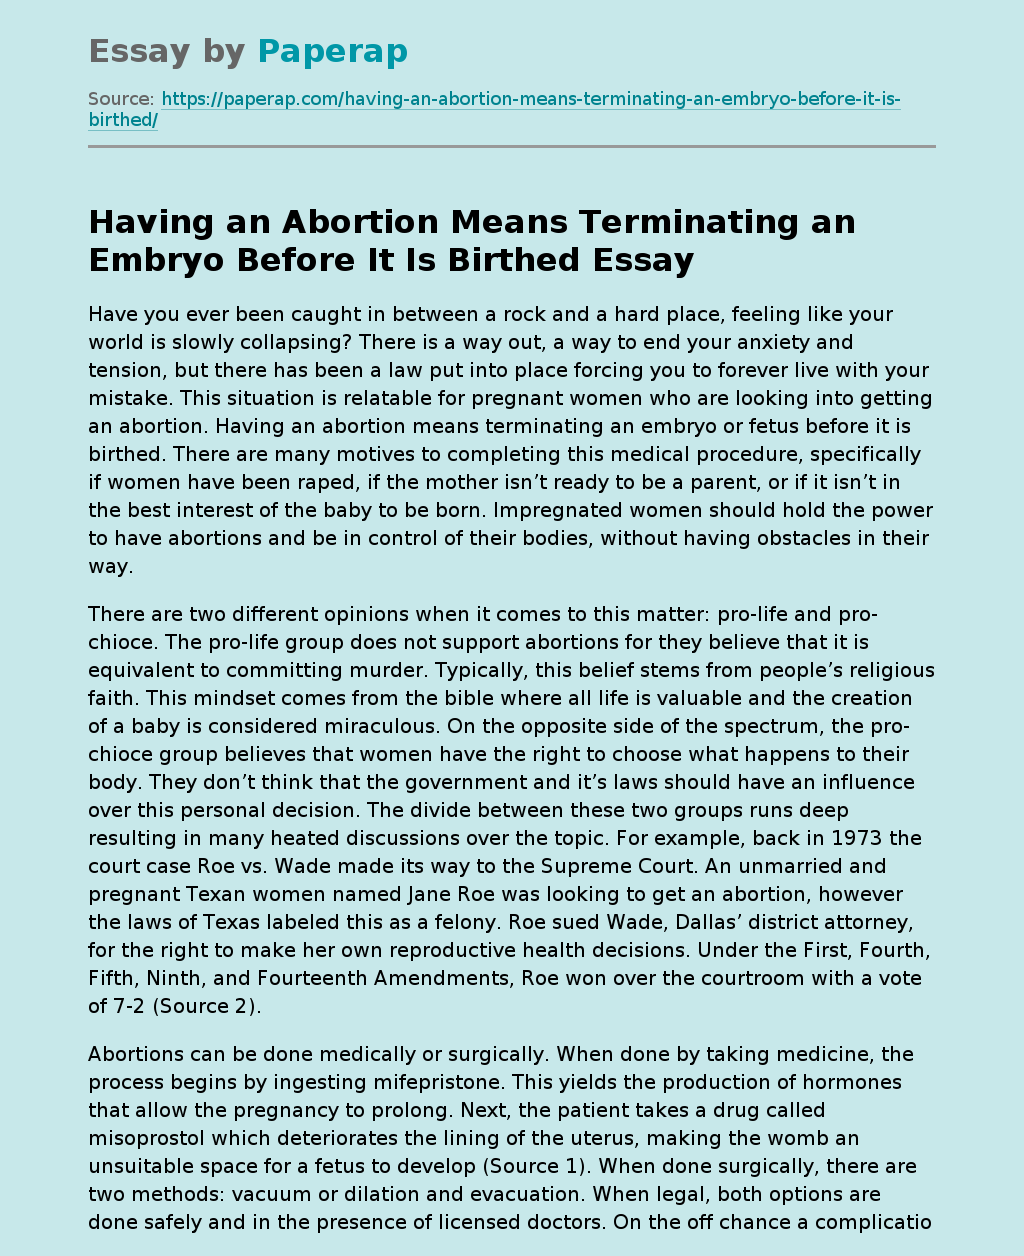 Having an Abortion Means Terminating an Embryo Before It Is Birthed